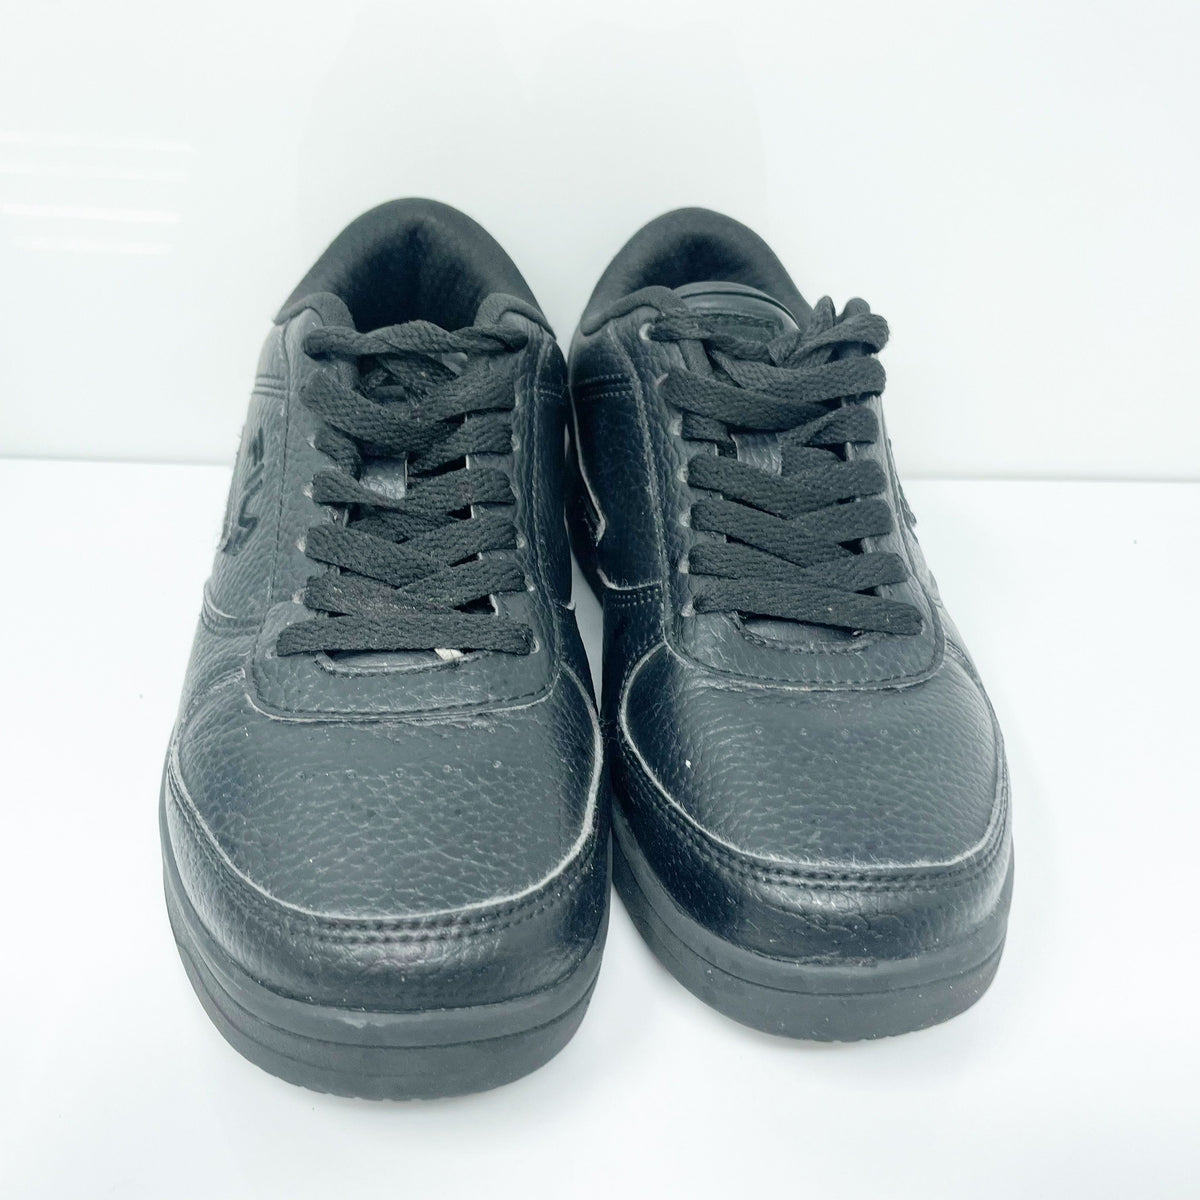 Fila Womens A Low 5CM01116-001 Black Casual Shoes Sneakers Size 7 ...